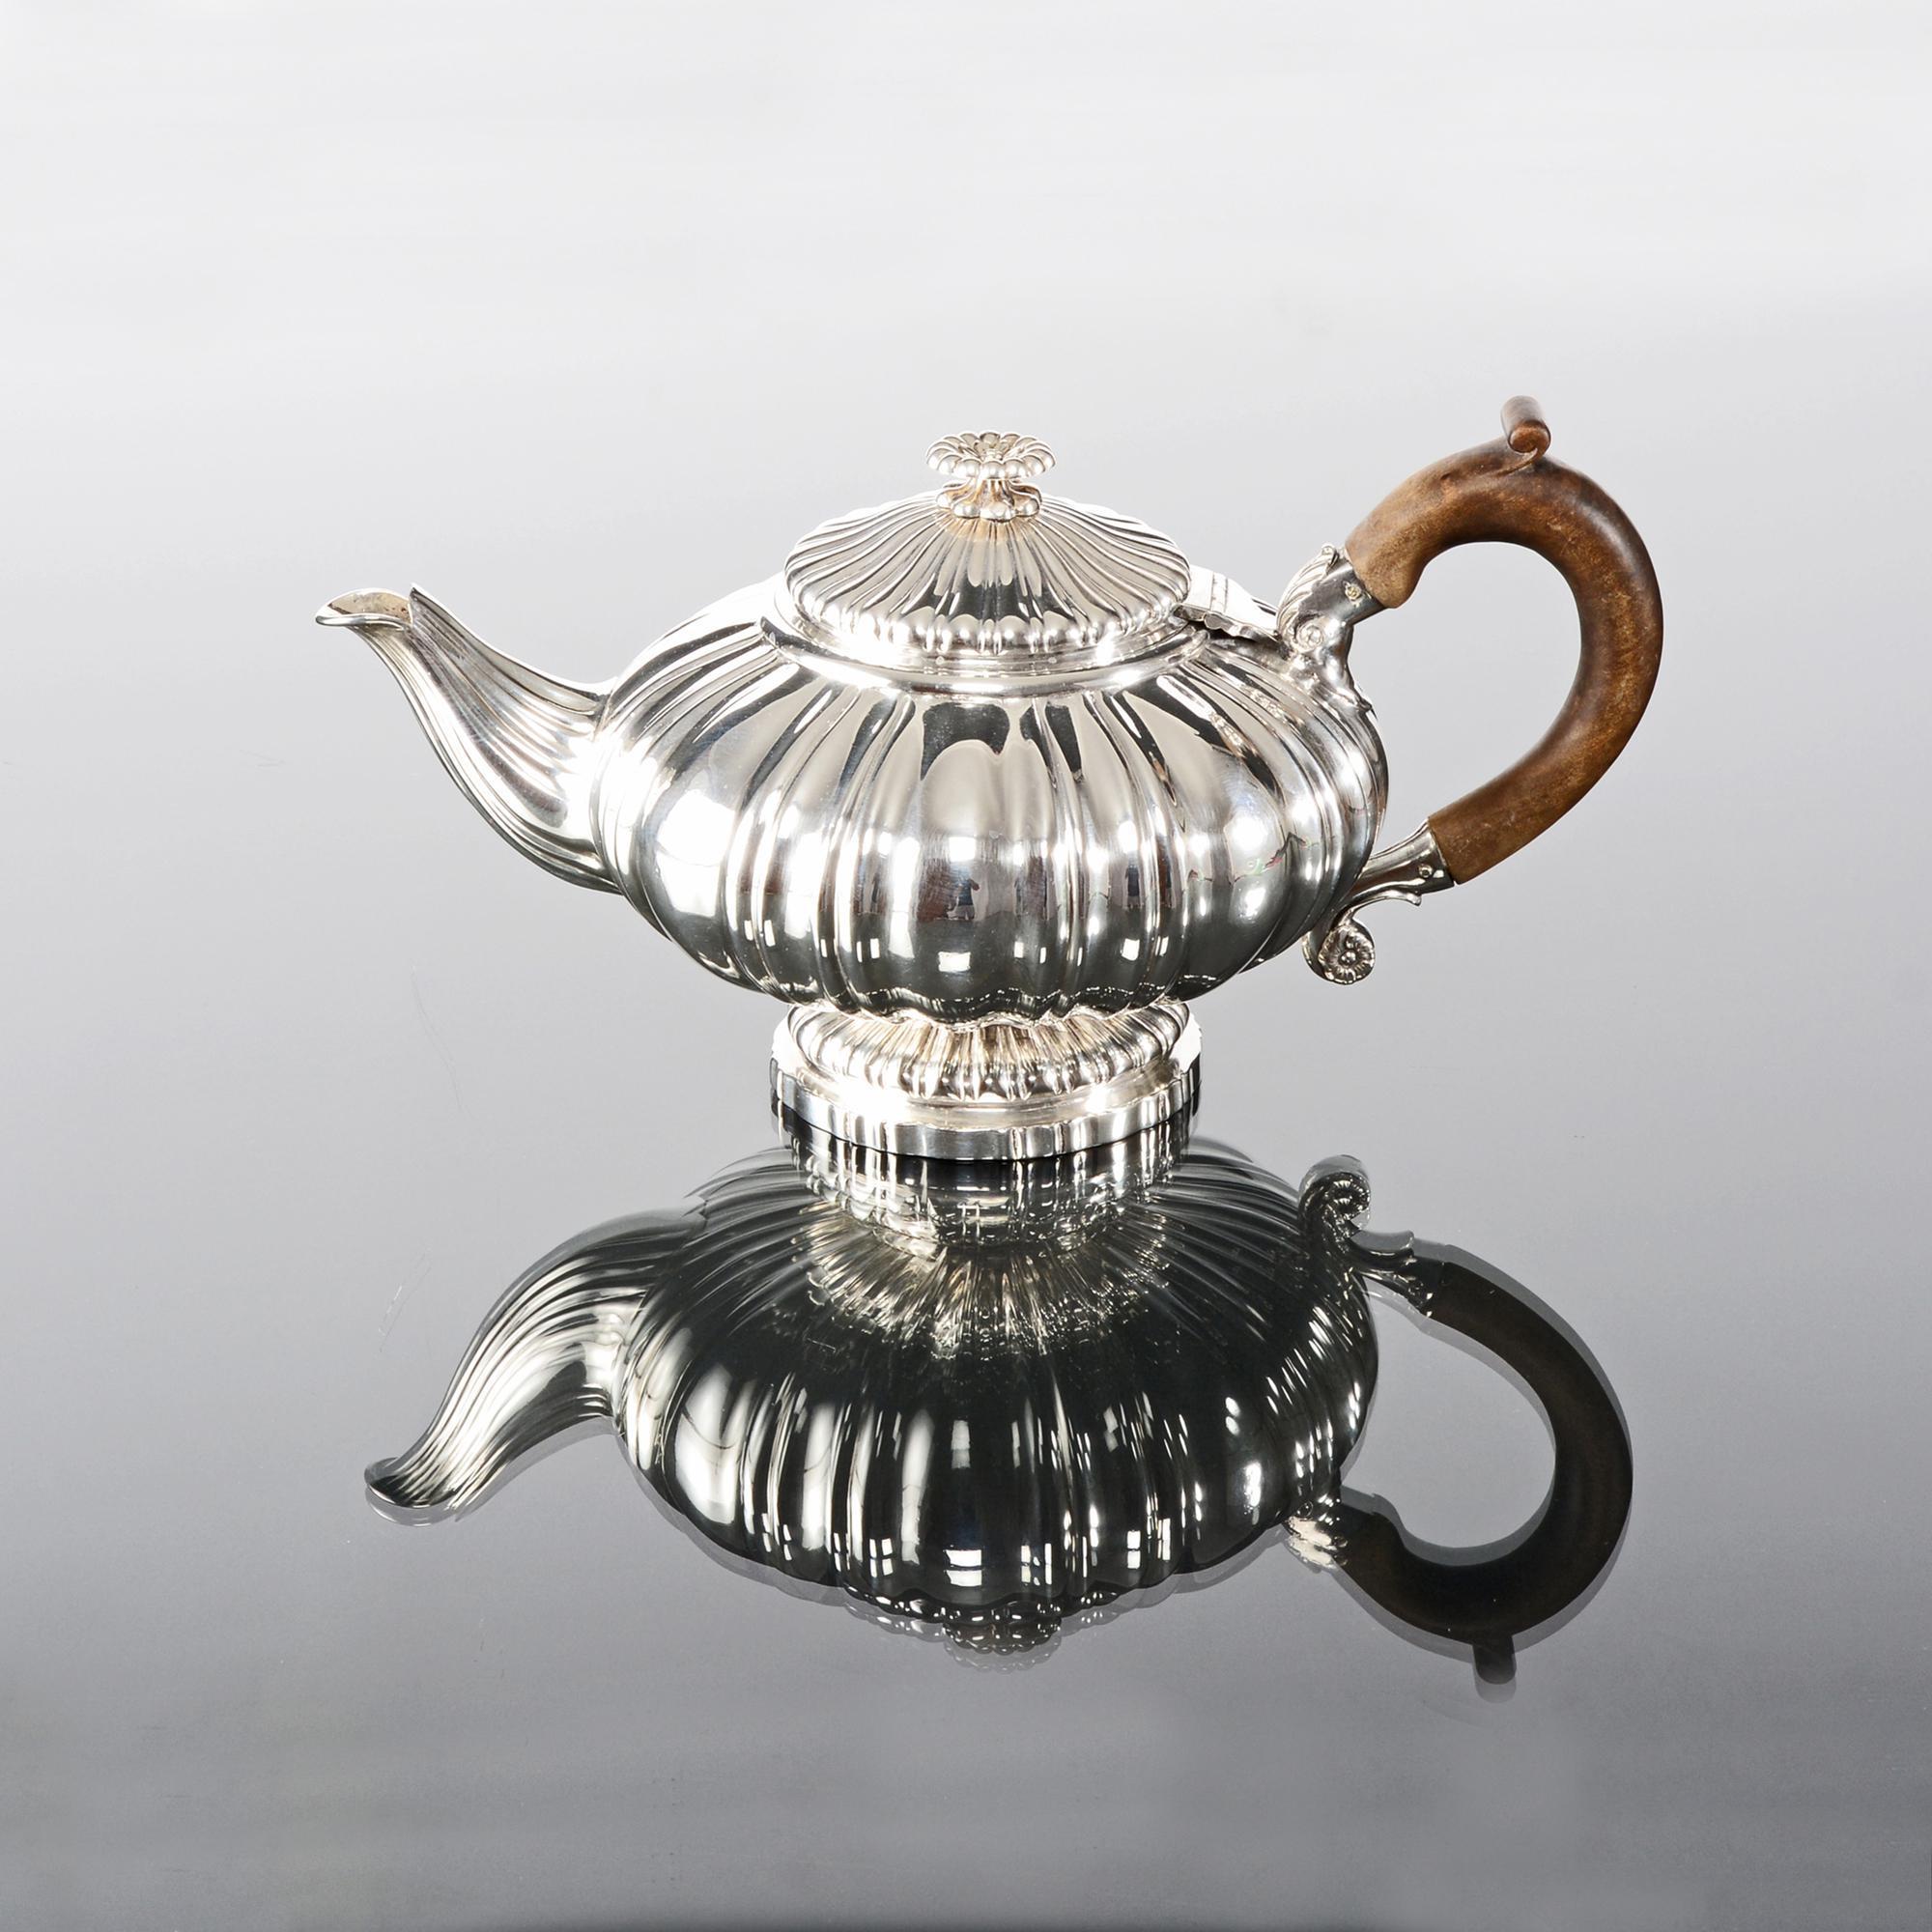 eautiful antique silver teapot, made in the first year of the reign of King George IV. The body of the silver teapot is a compressed fluted melon form and rests on a fluted and shaped circular base.

While the fluting extends to the graceful